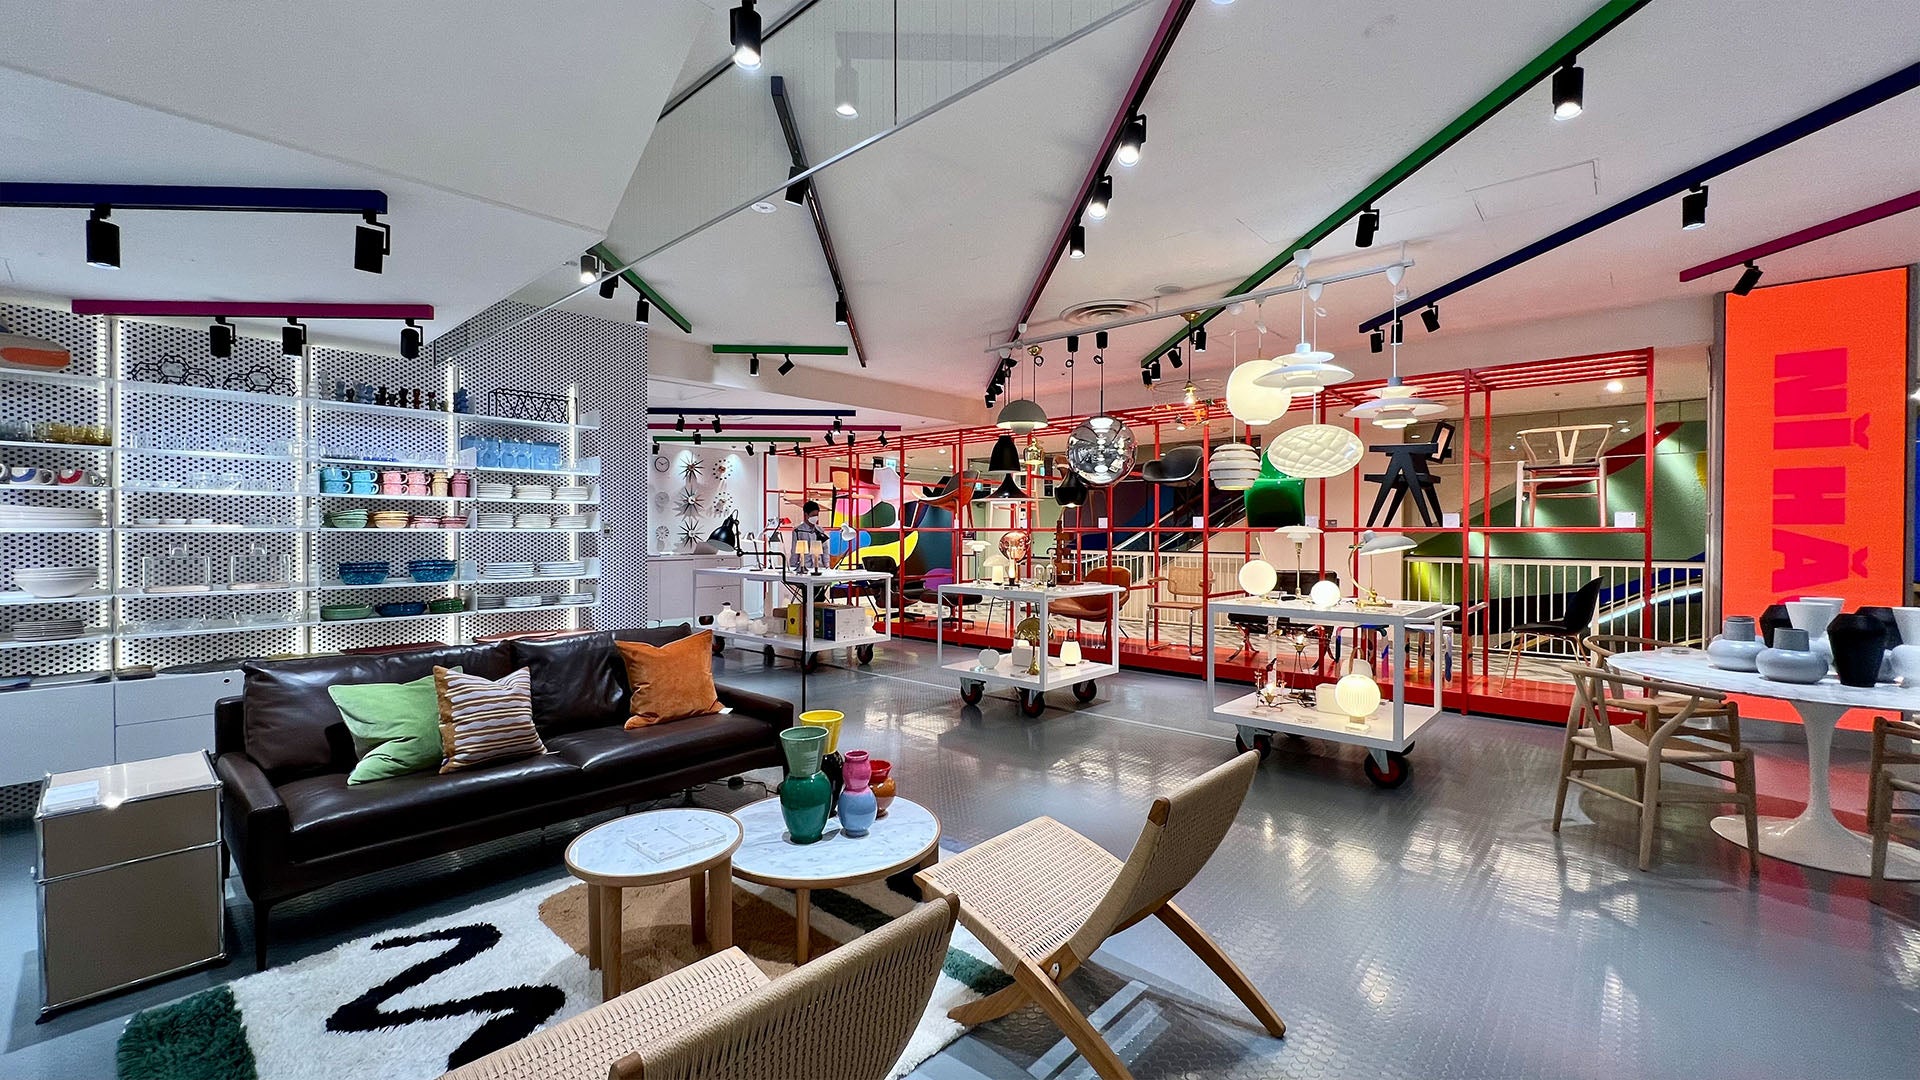 A vibrant and modern interior view of The Conran Shop in Kobe, with a colorful layout featuring a variety of home decor items. The store includes sections with different furniture like sofas, chairs, and tables, displayed among eclectic accessories such as lamps, vases, and textiles.